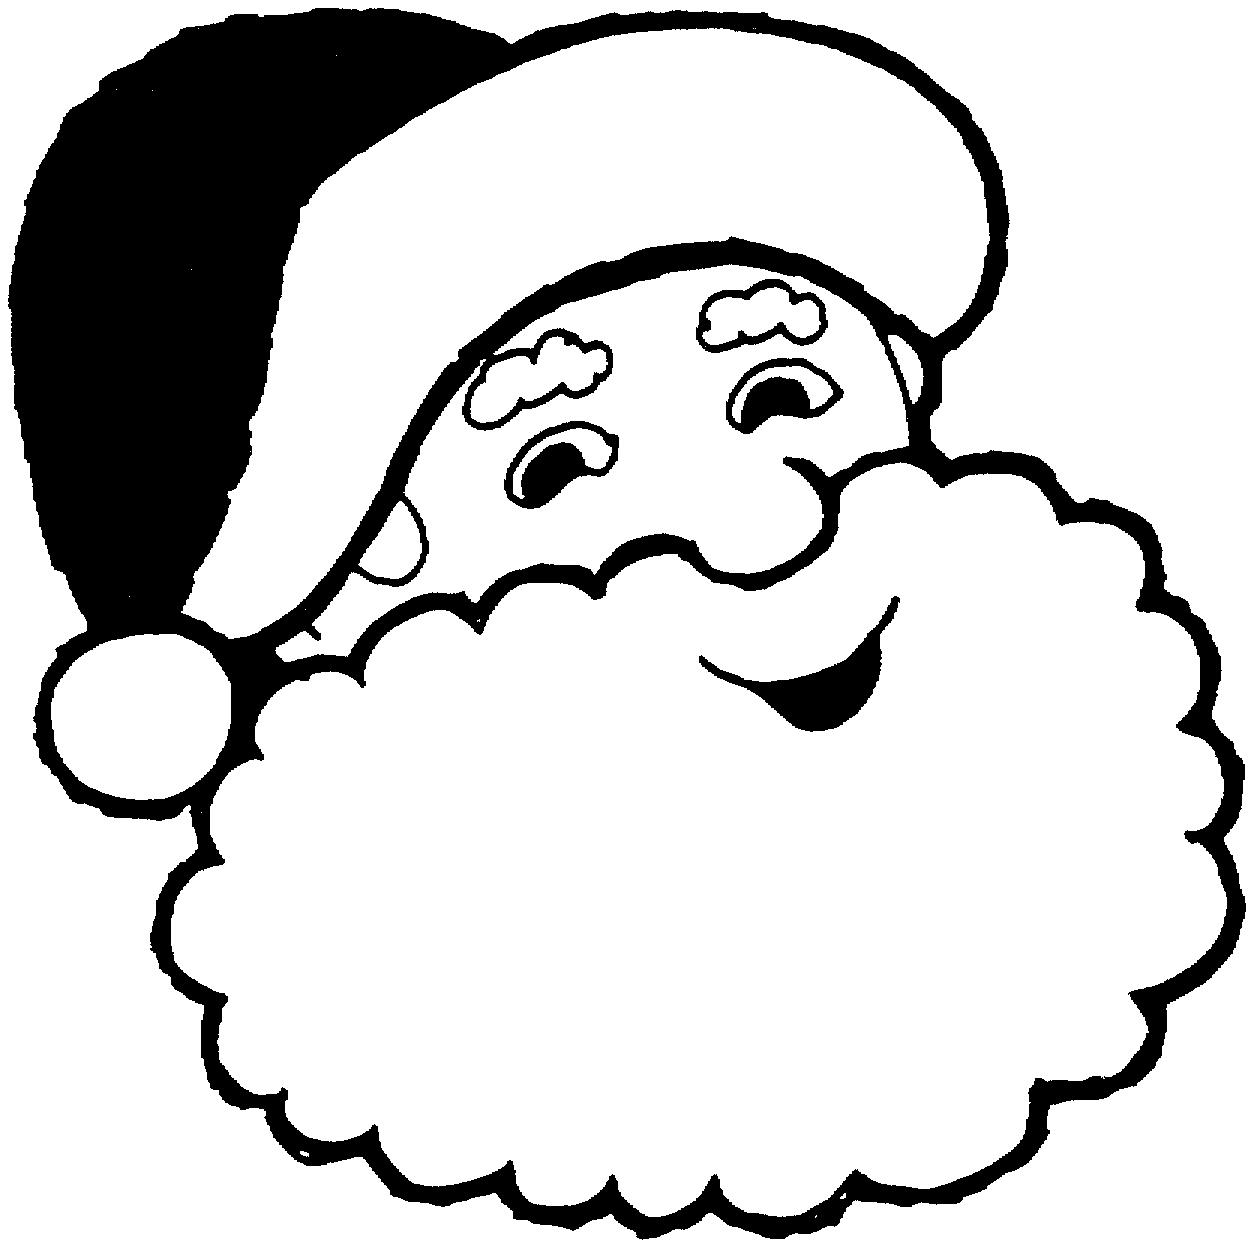 Santa claus letter clipart black and white 